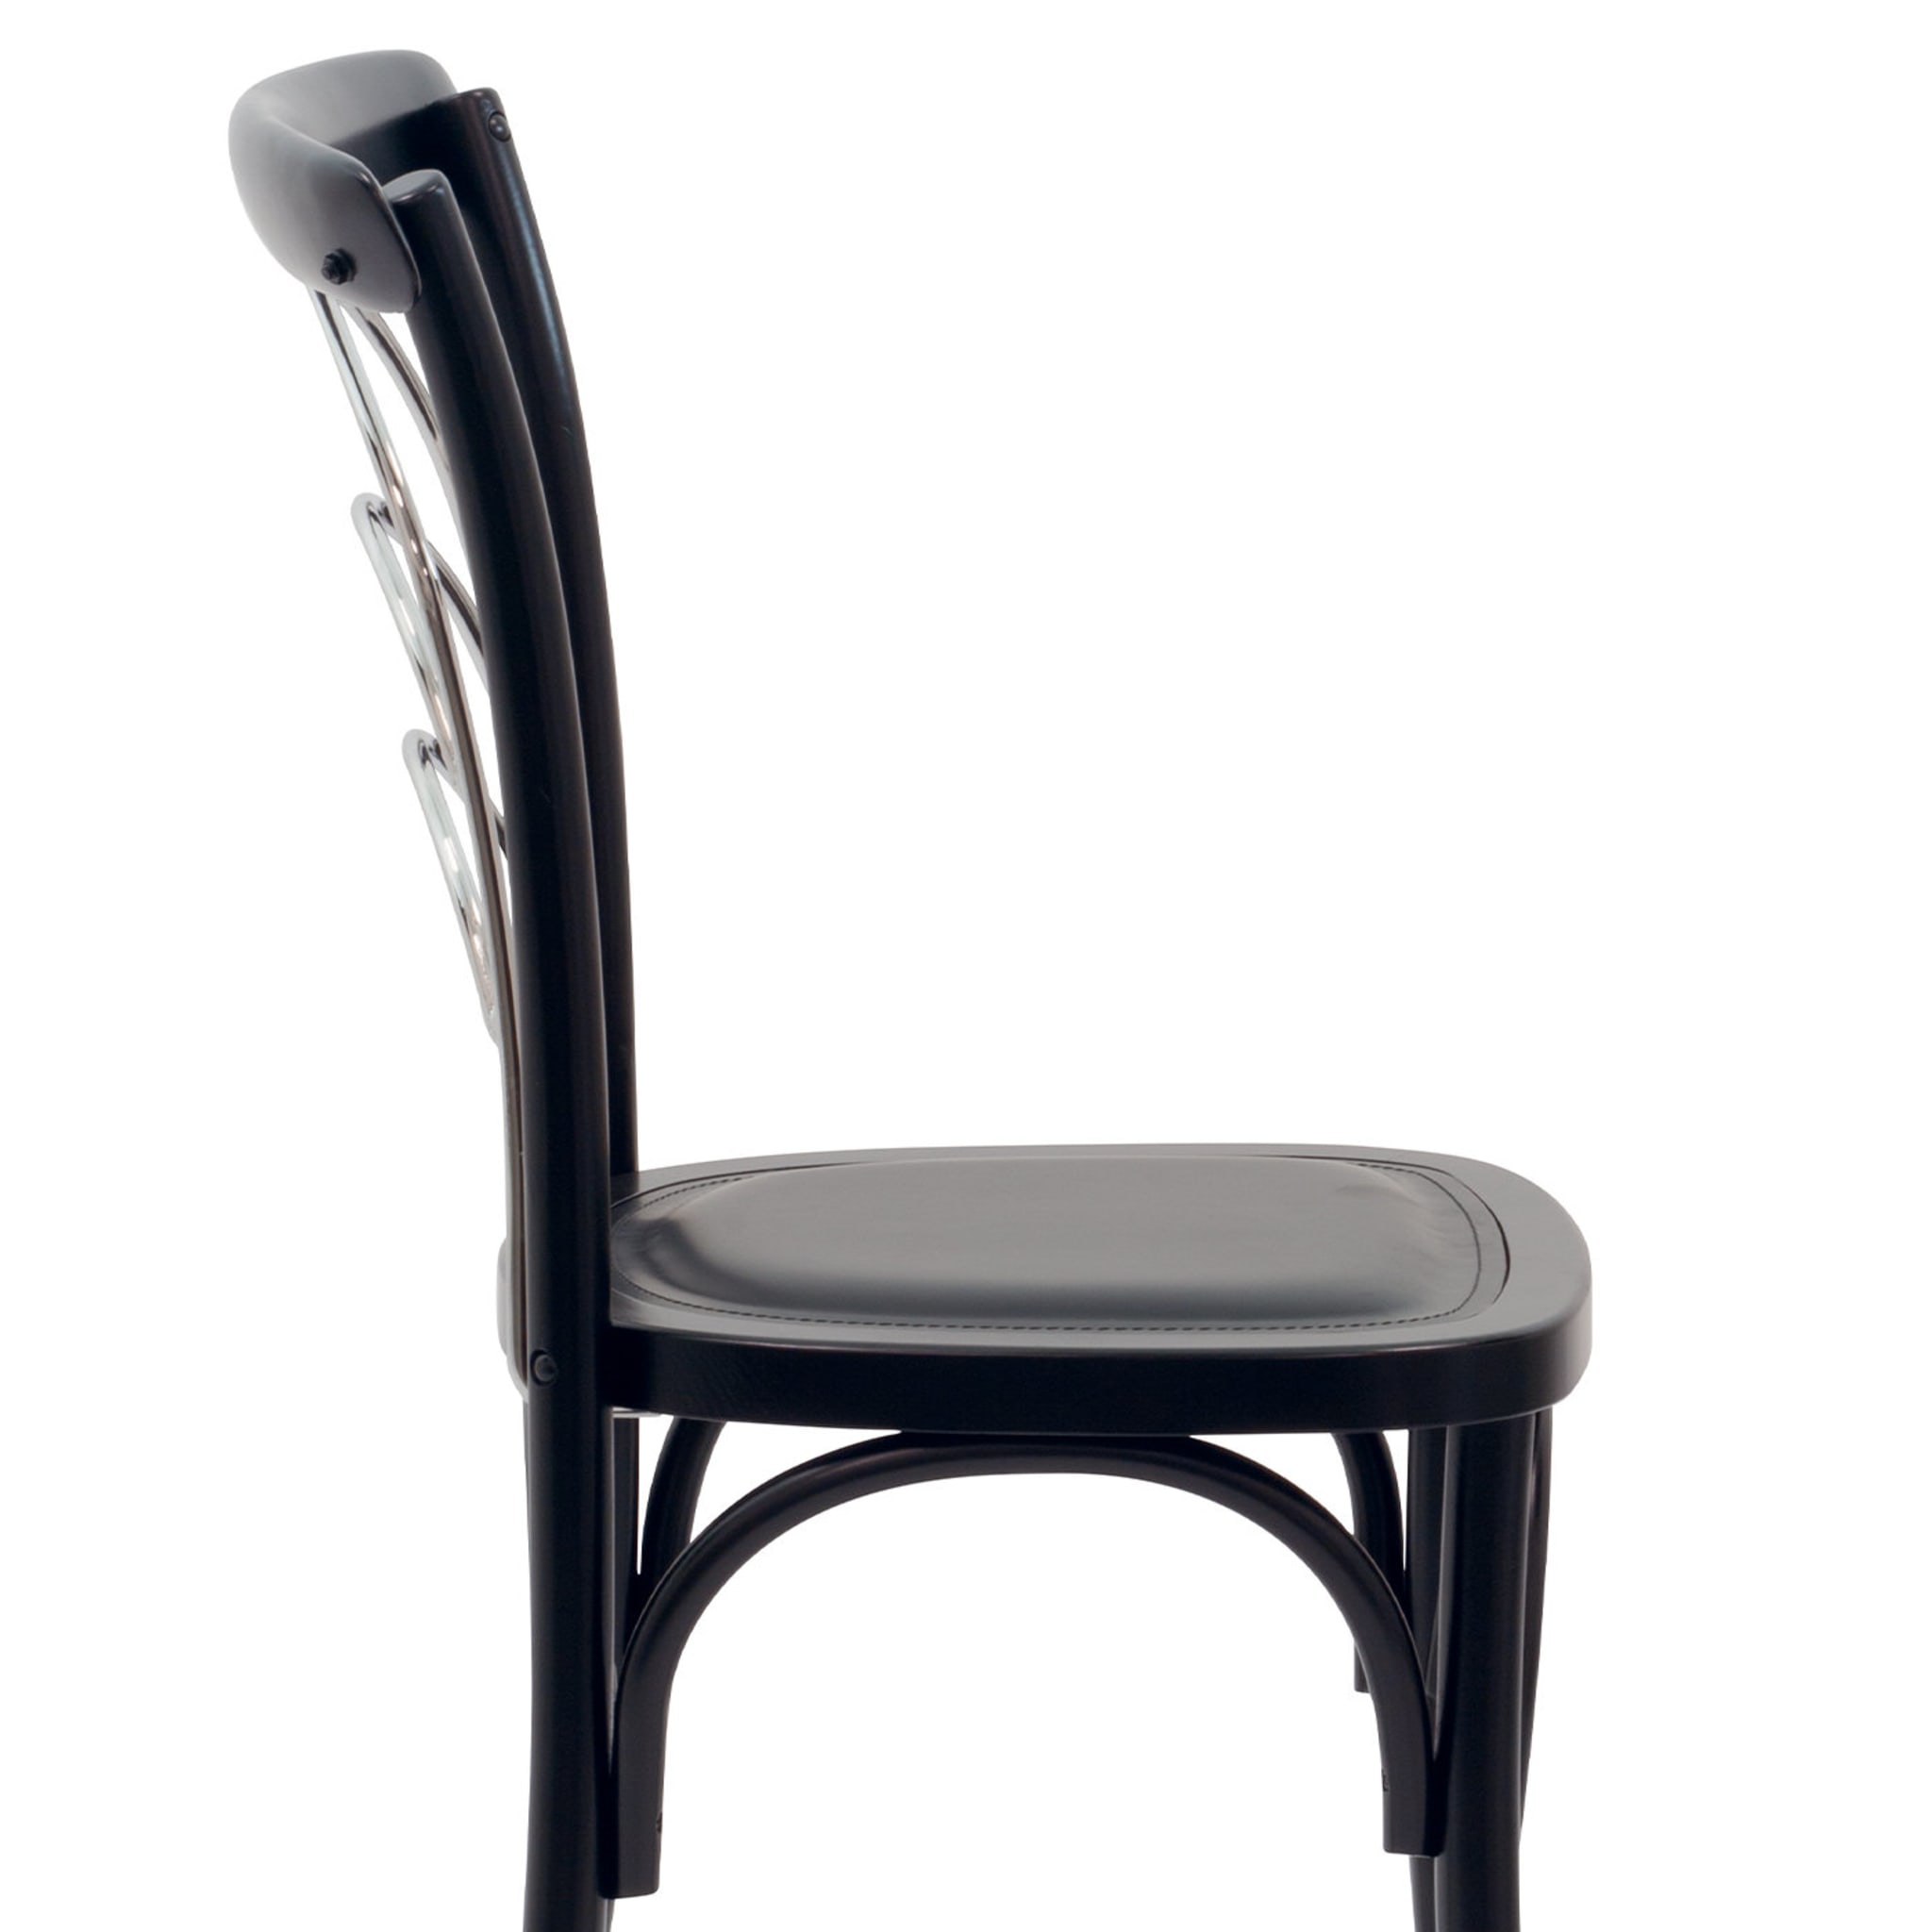 Ciao Arco Set of 2 Black Chairs - Alternative view 1